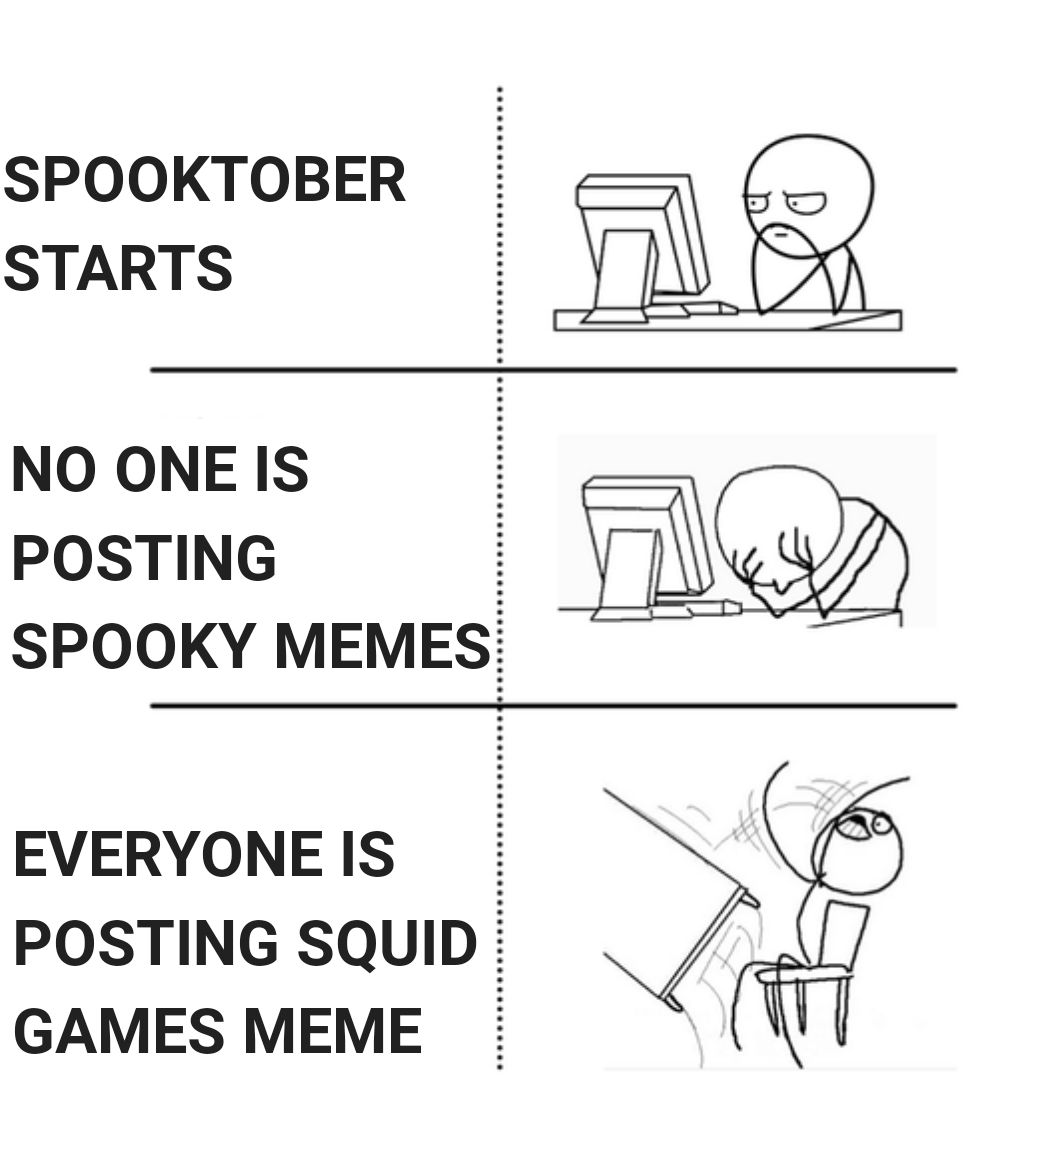 Every other spooktober was better